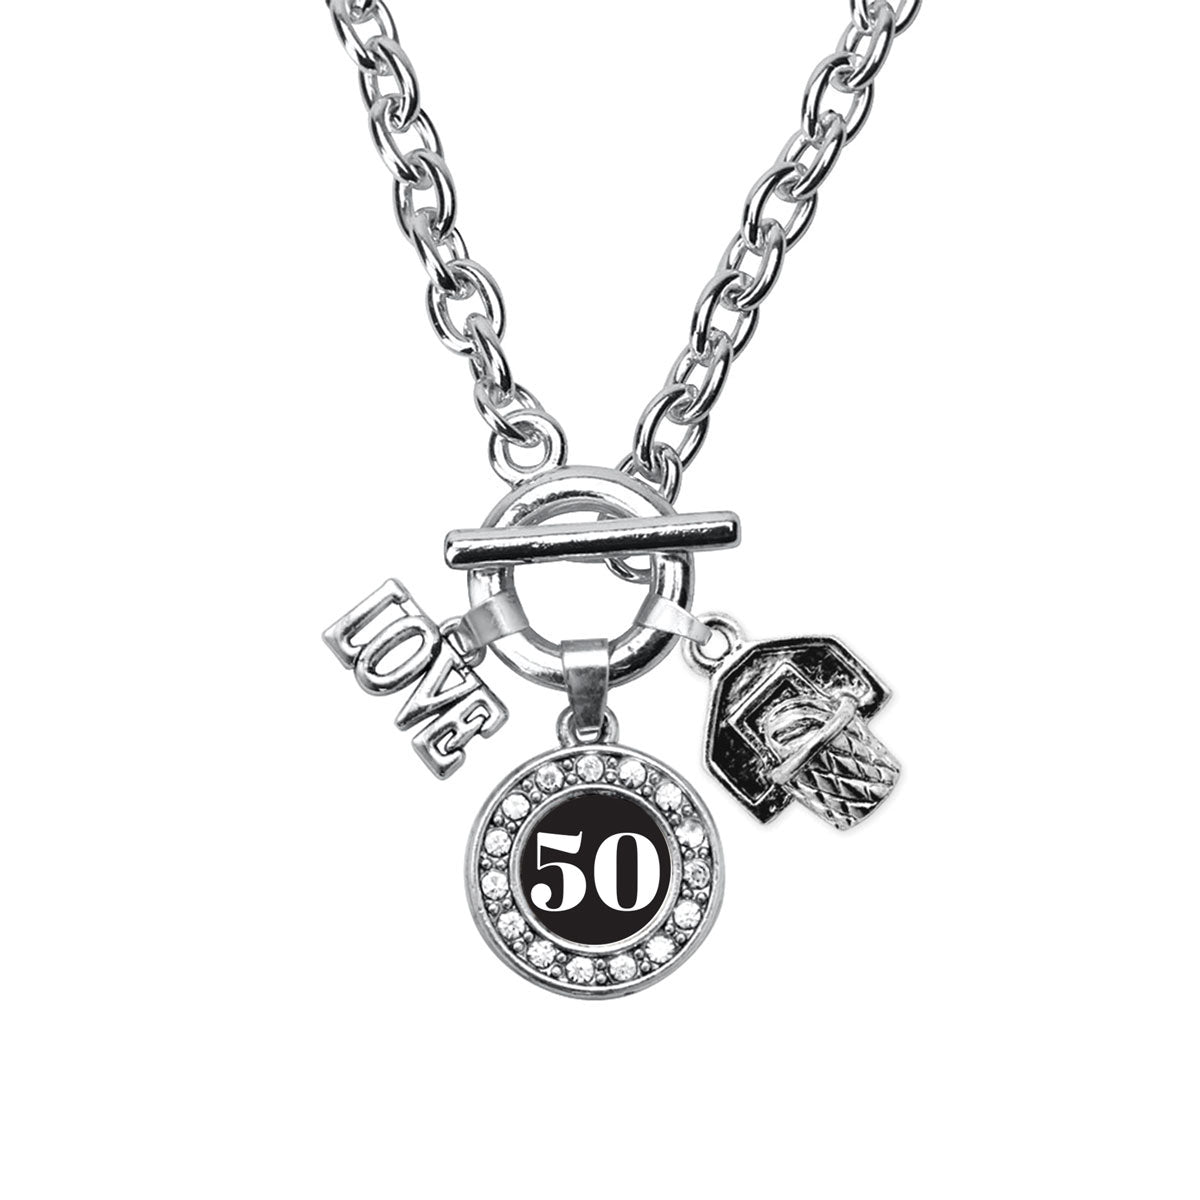 Silver Basketball Hoop - Sports Number 50 Circle Charm Toggle Necklace